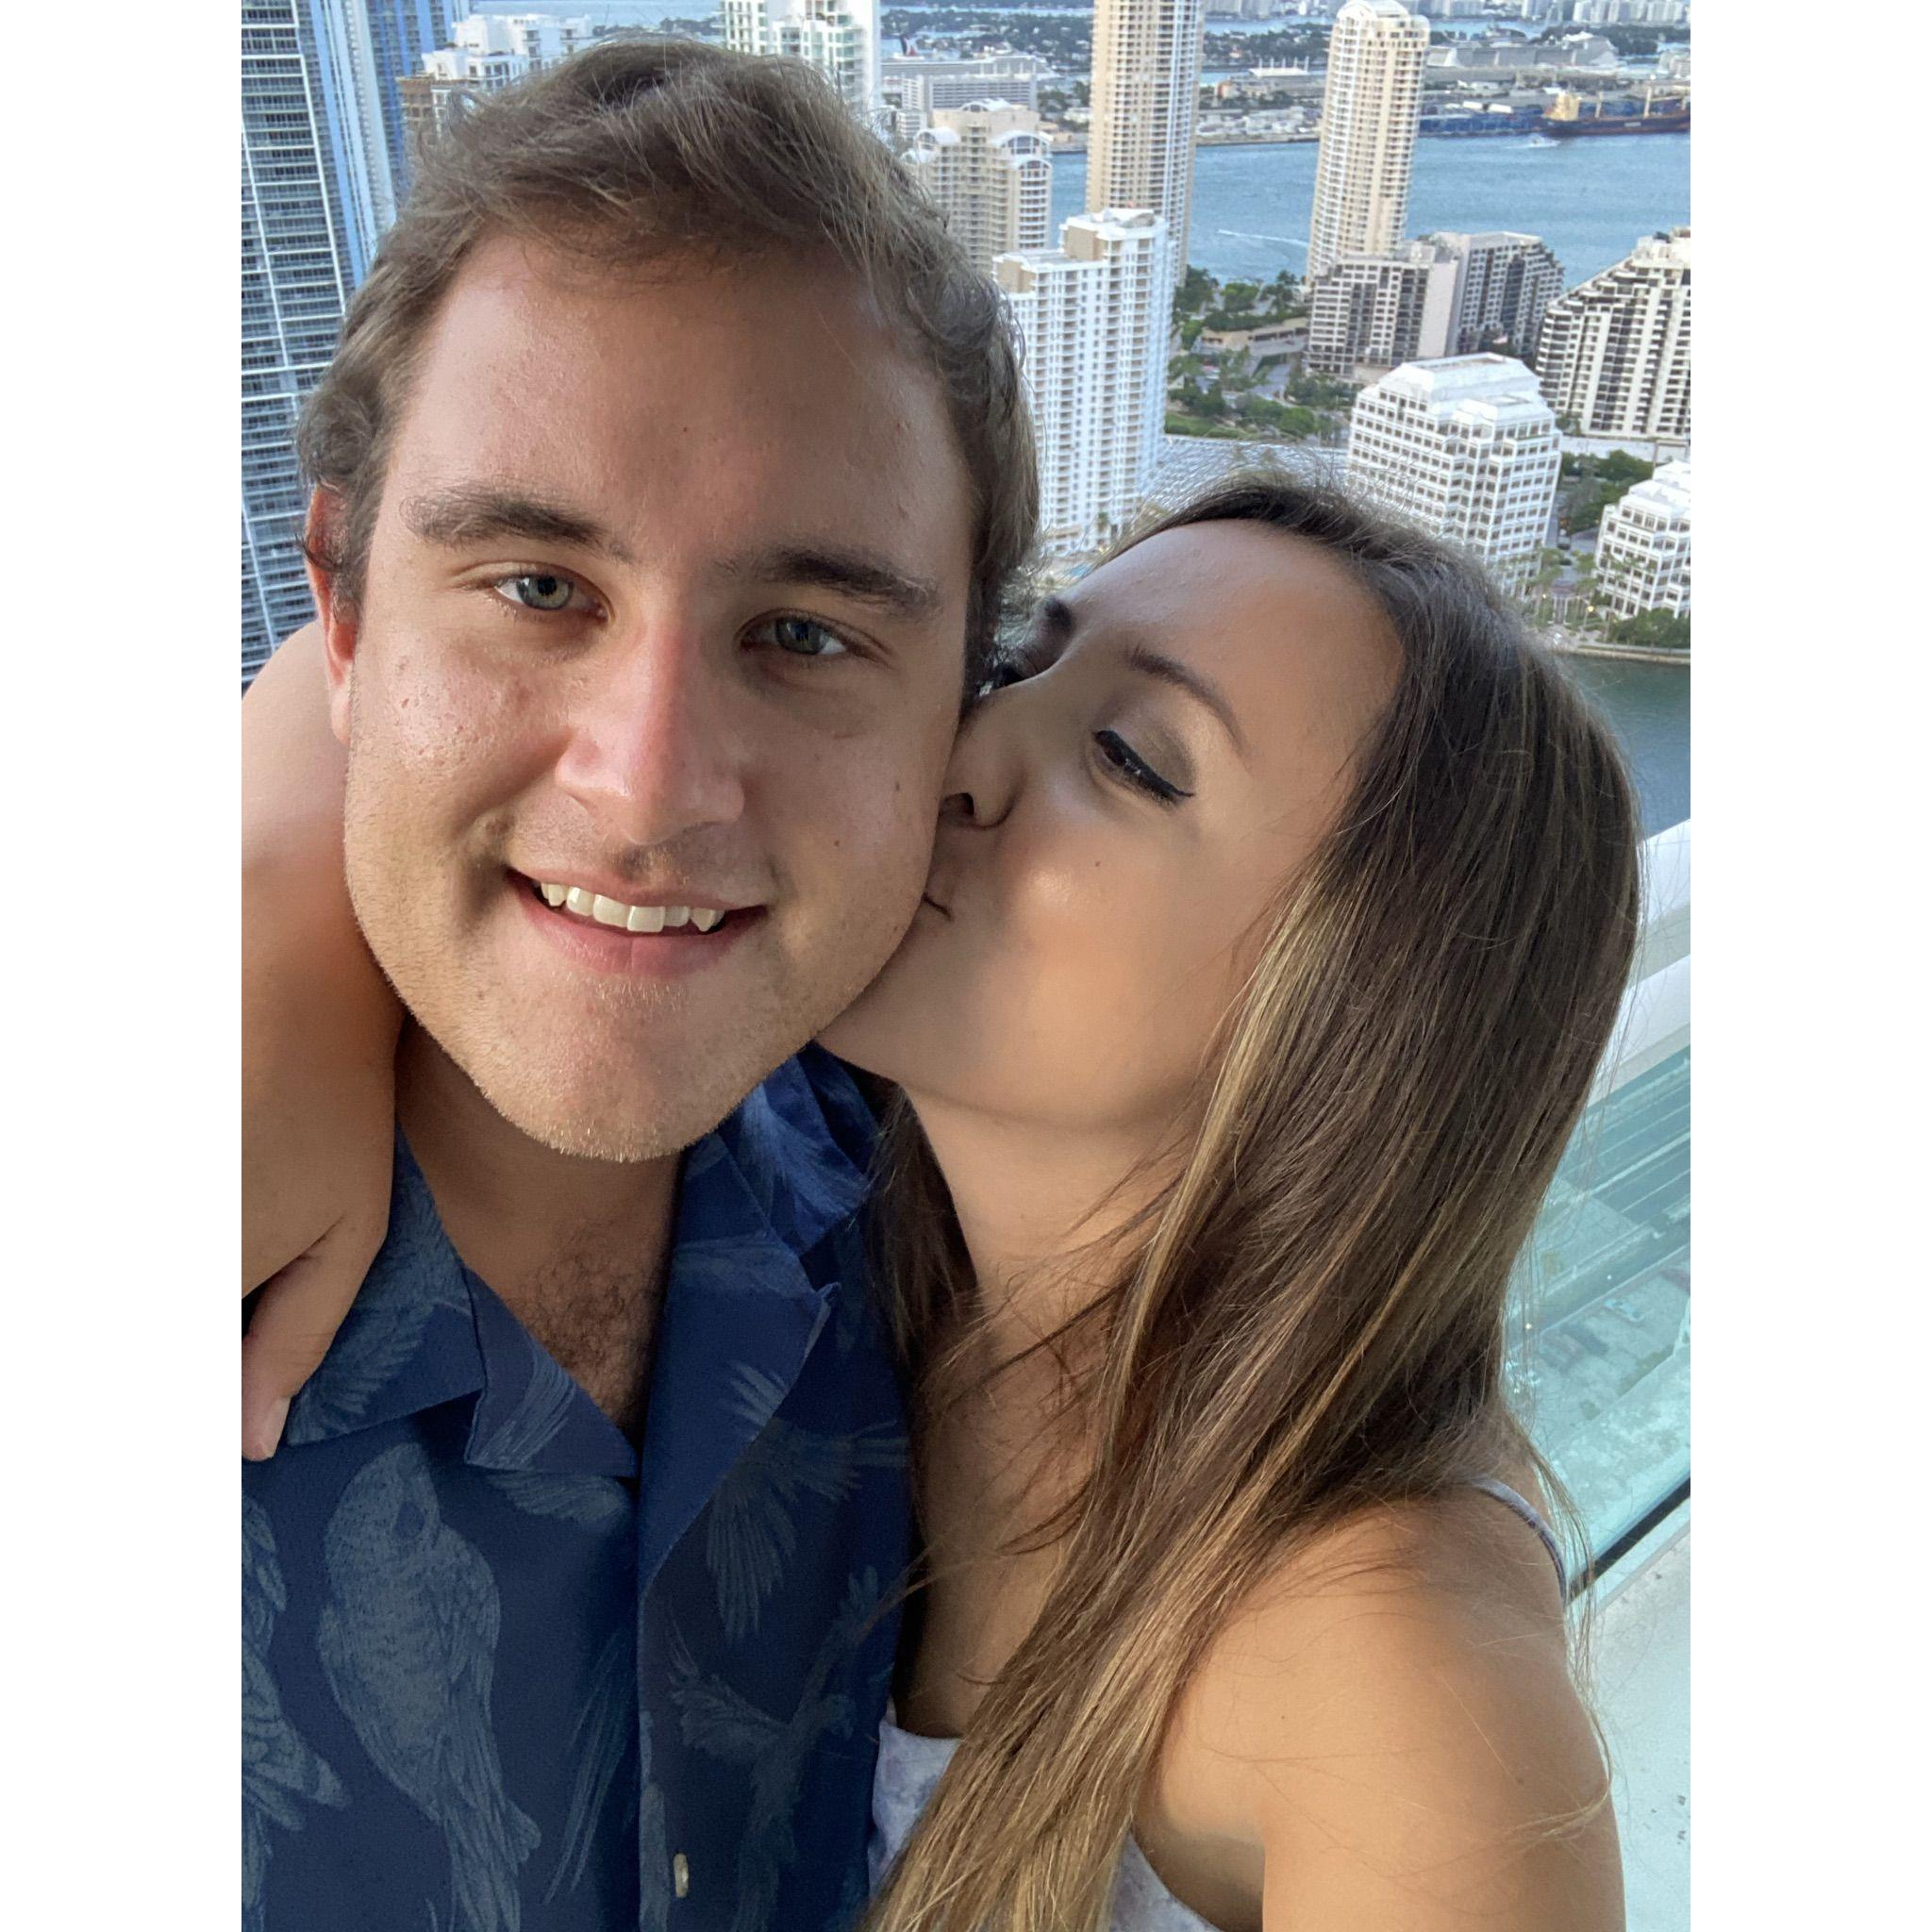 The two share one of their final kisses from the Brickell apartment balcony before moving out and setting their sights on their next adventure!